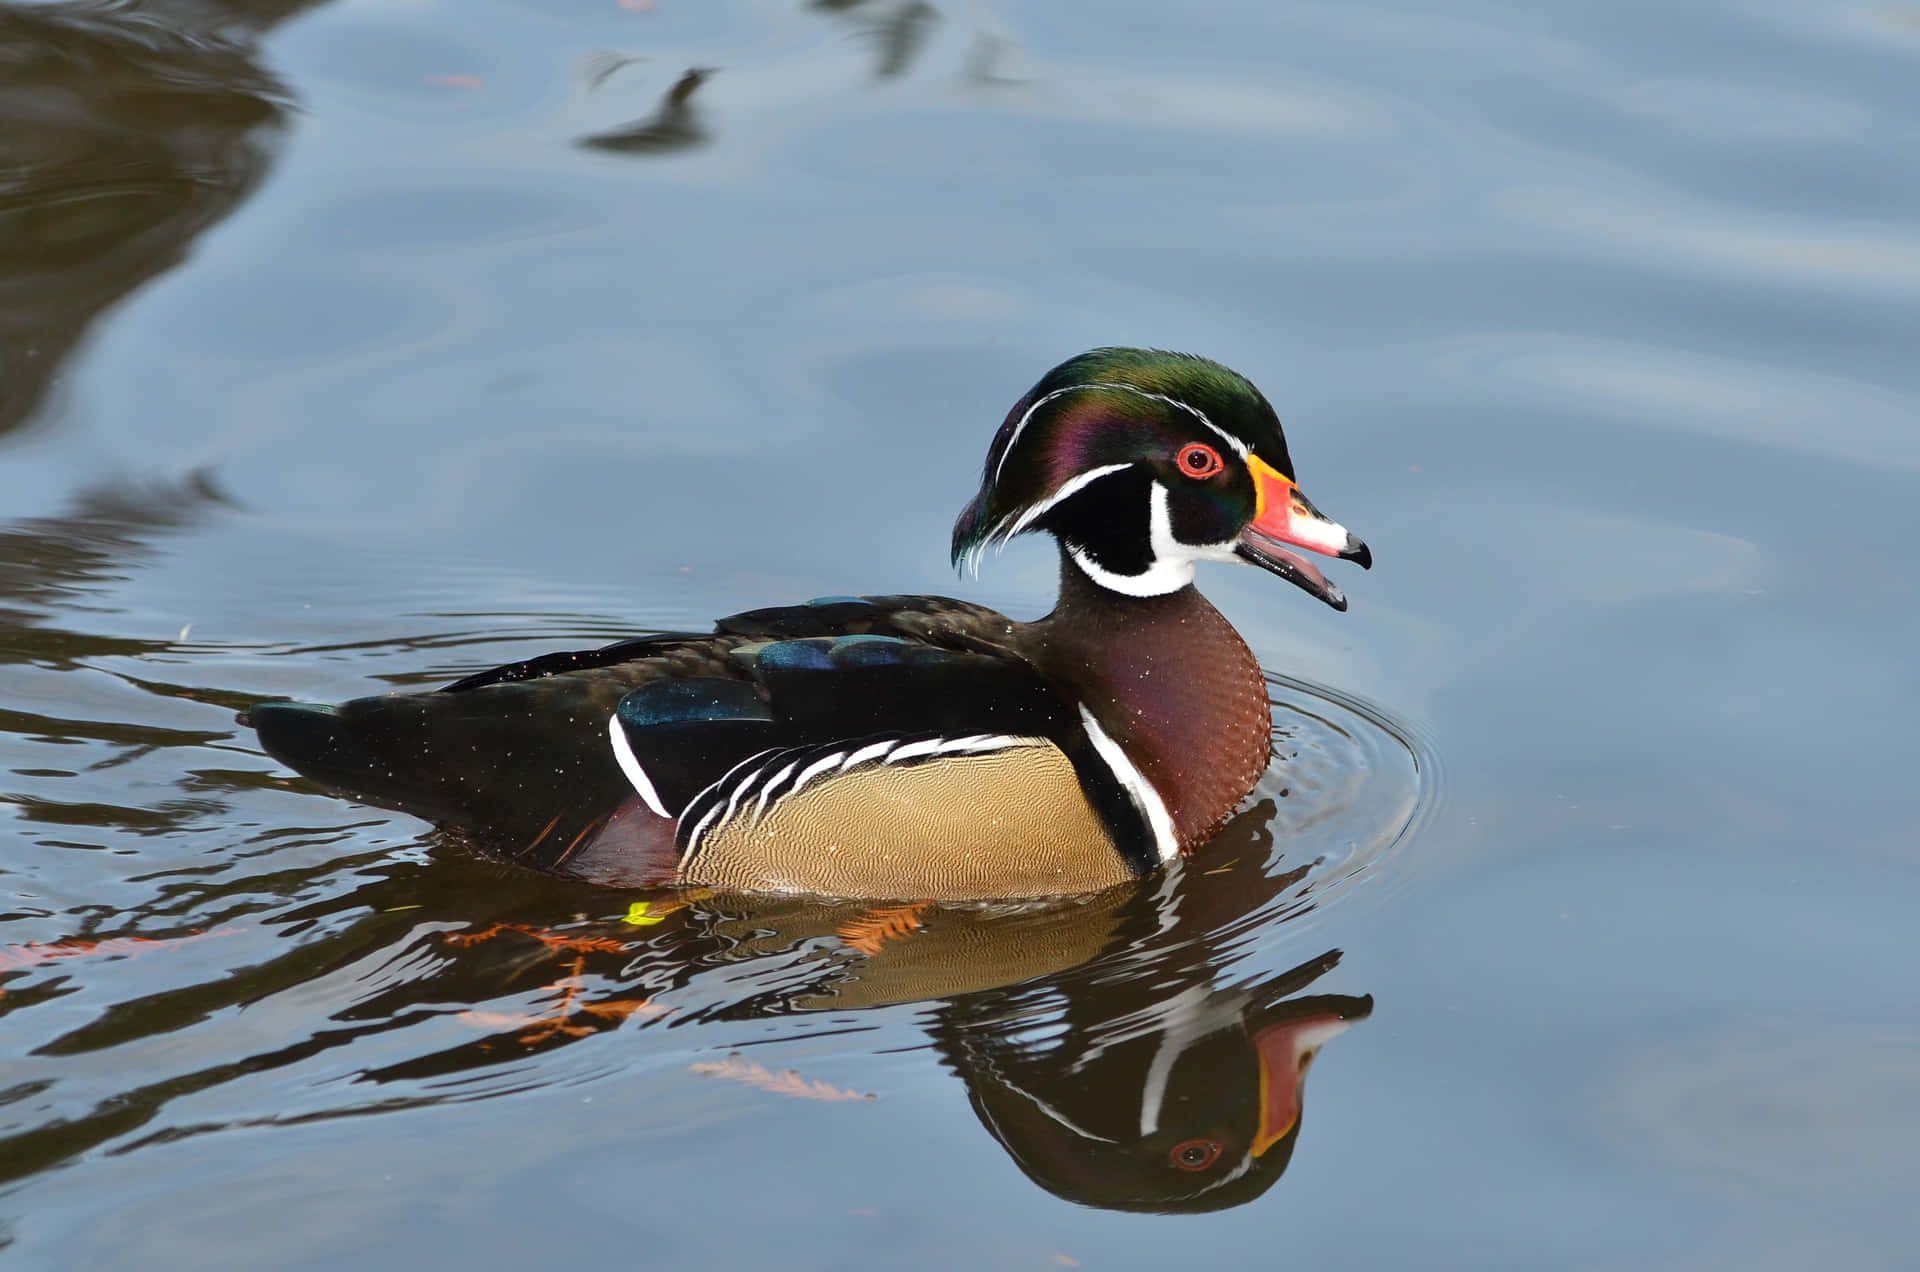 Majestic Wood Duck Posing by the Pond